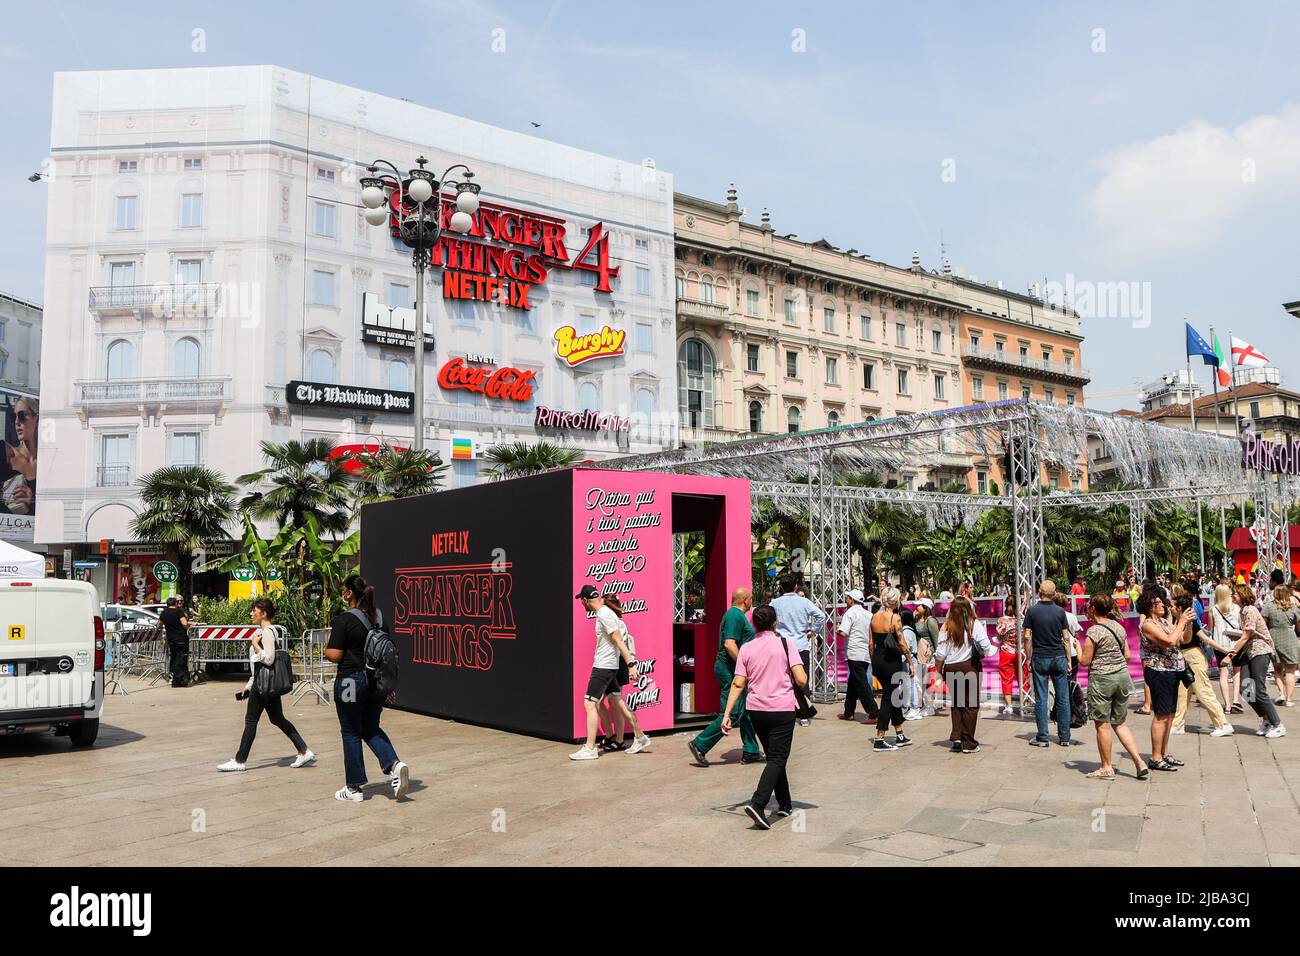 Netflix launch campaign for the release of Stranger Things 4 in Piazza Duomo, Milano, Italy, on May 27 2022. For the occasion, the centre of Milan has been decked out with activities reminiscent of the 1980s Stock Photo